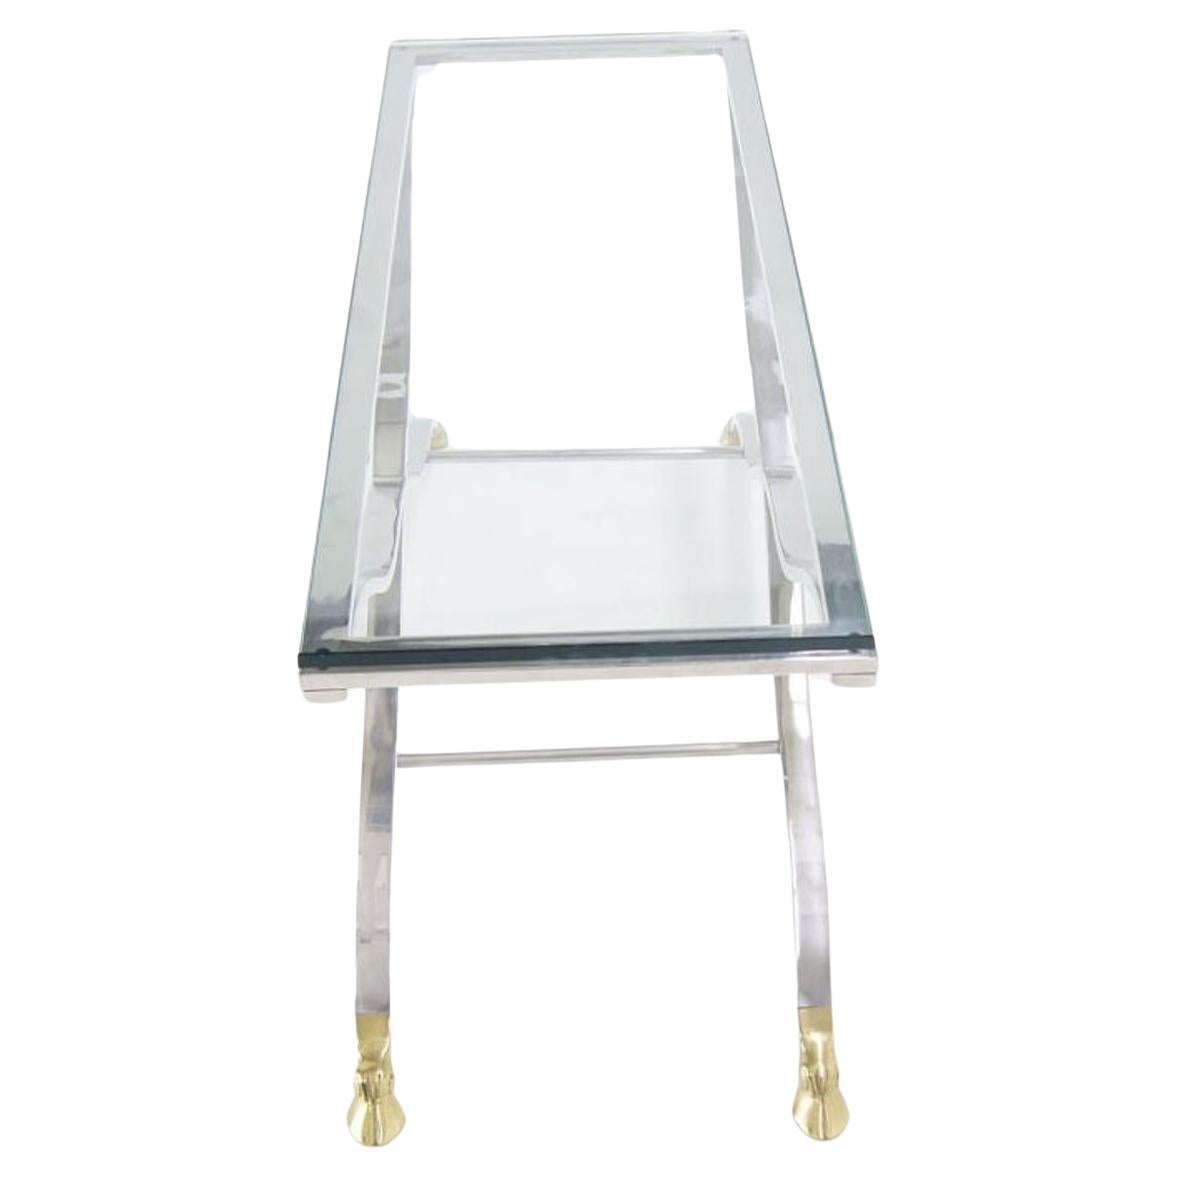 High quality highly polished solid chrome glass top console table.